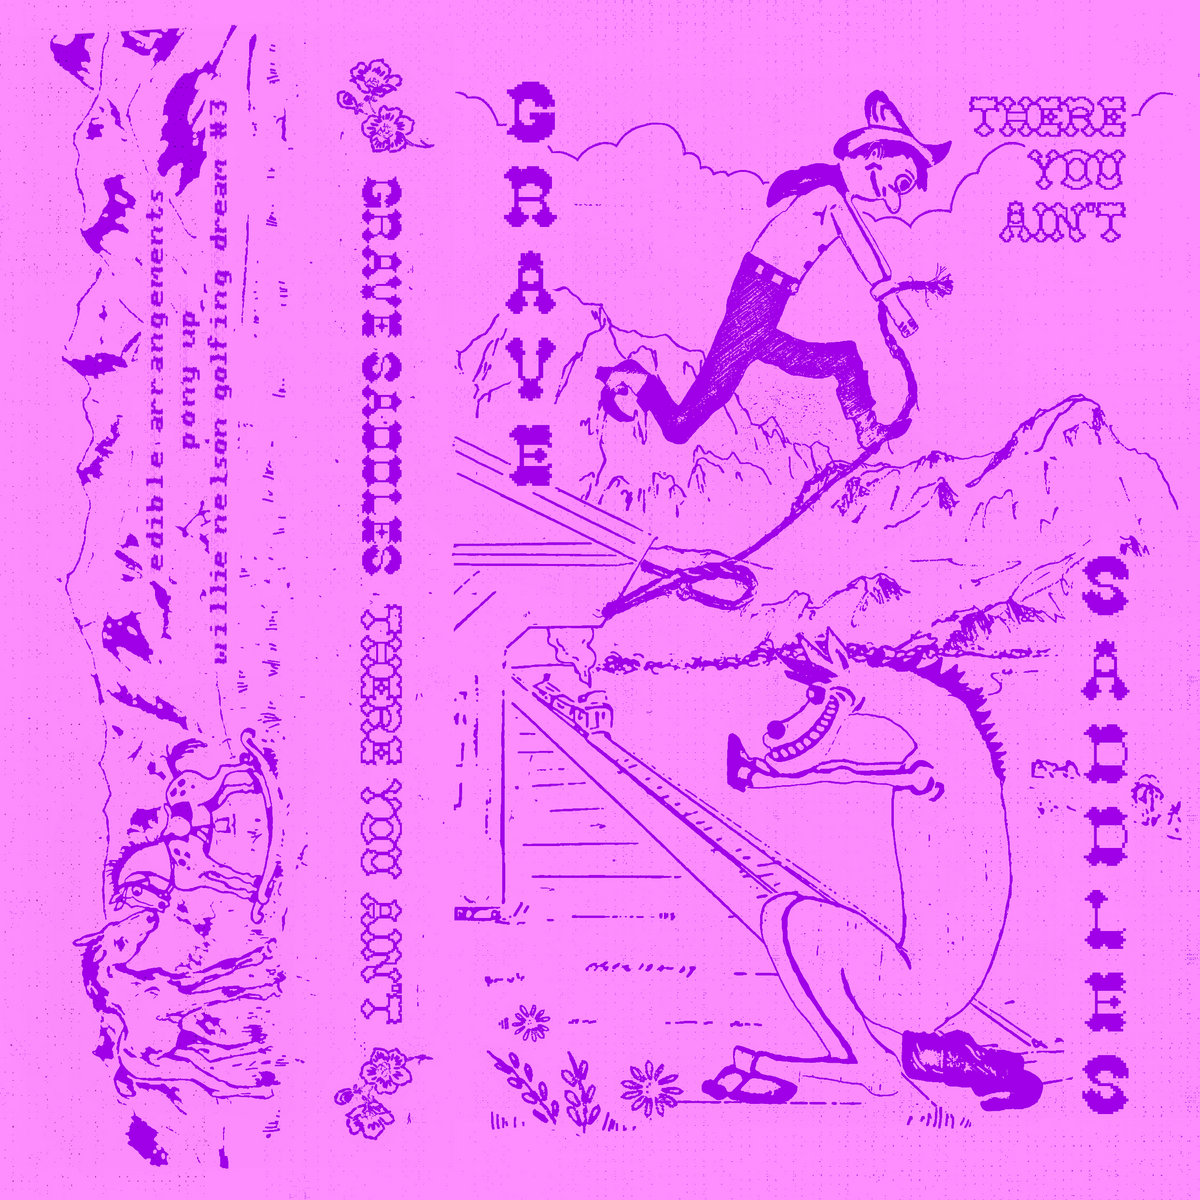 Grave Saddles there you aint album art - western-themed illustrations in purple on a pink background